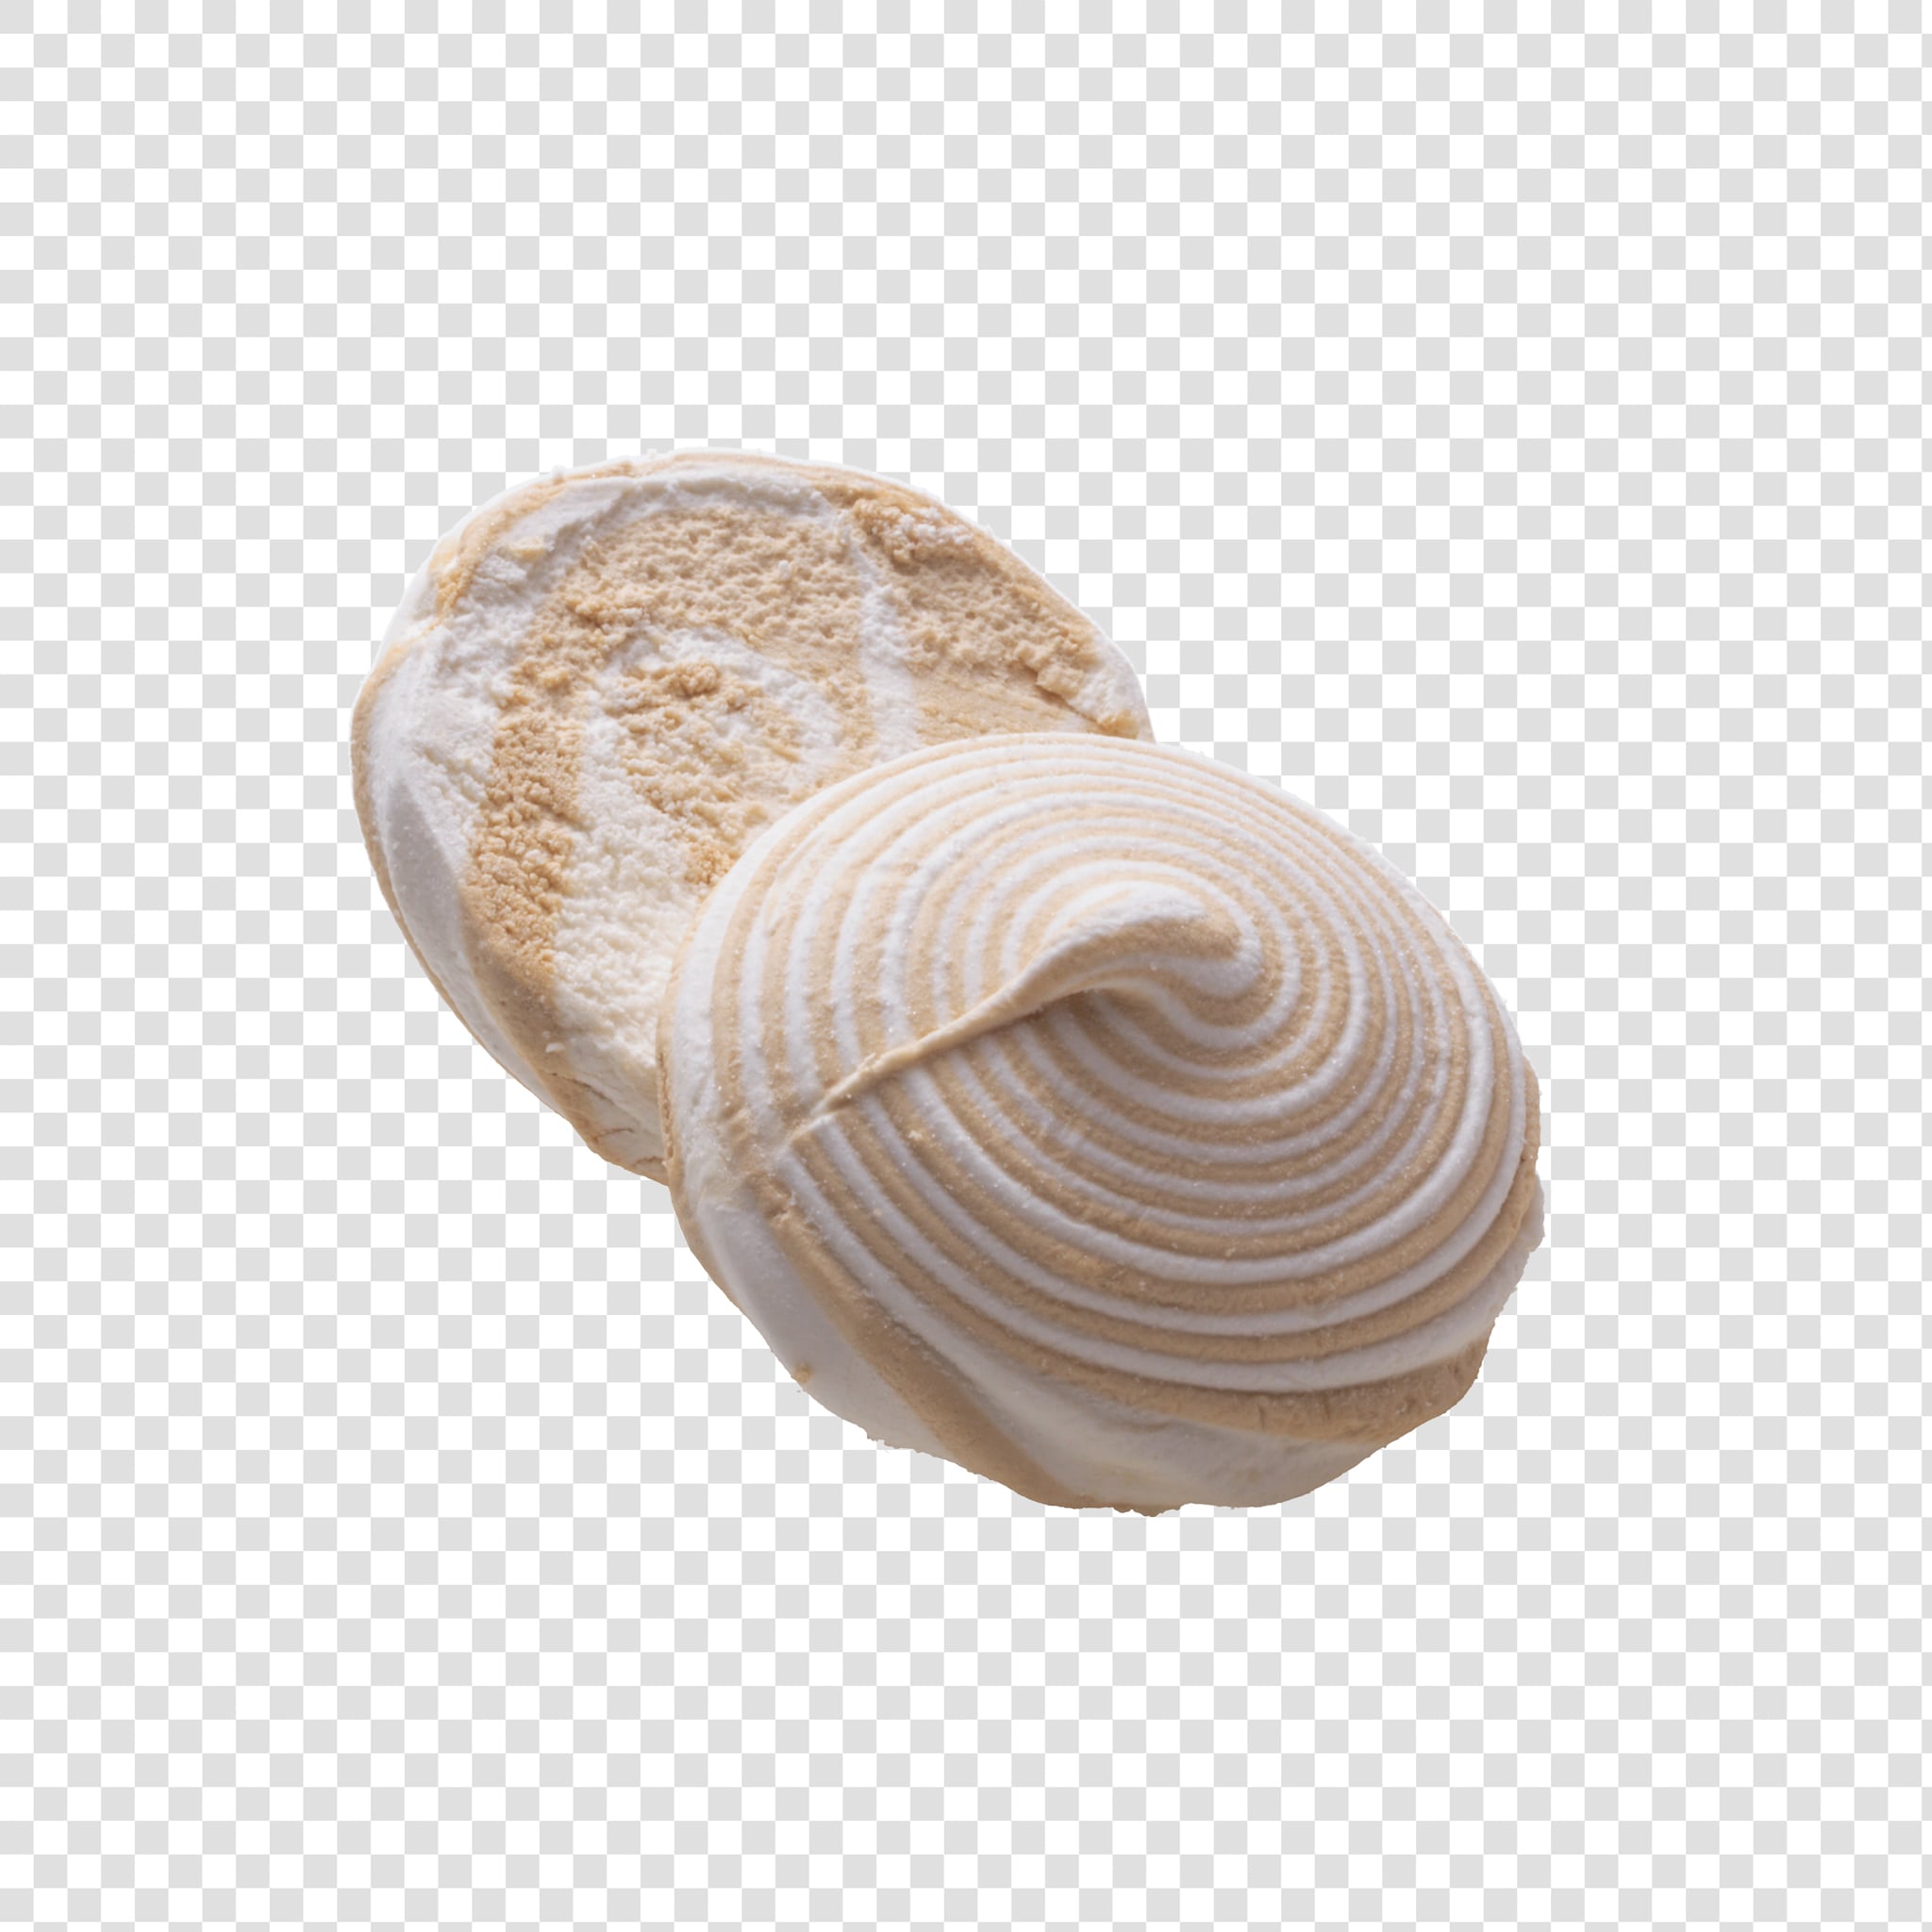 Marshmallow PSD isolated image